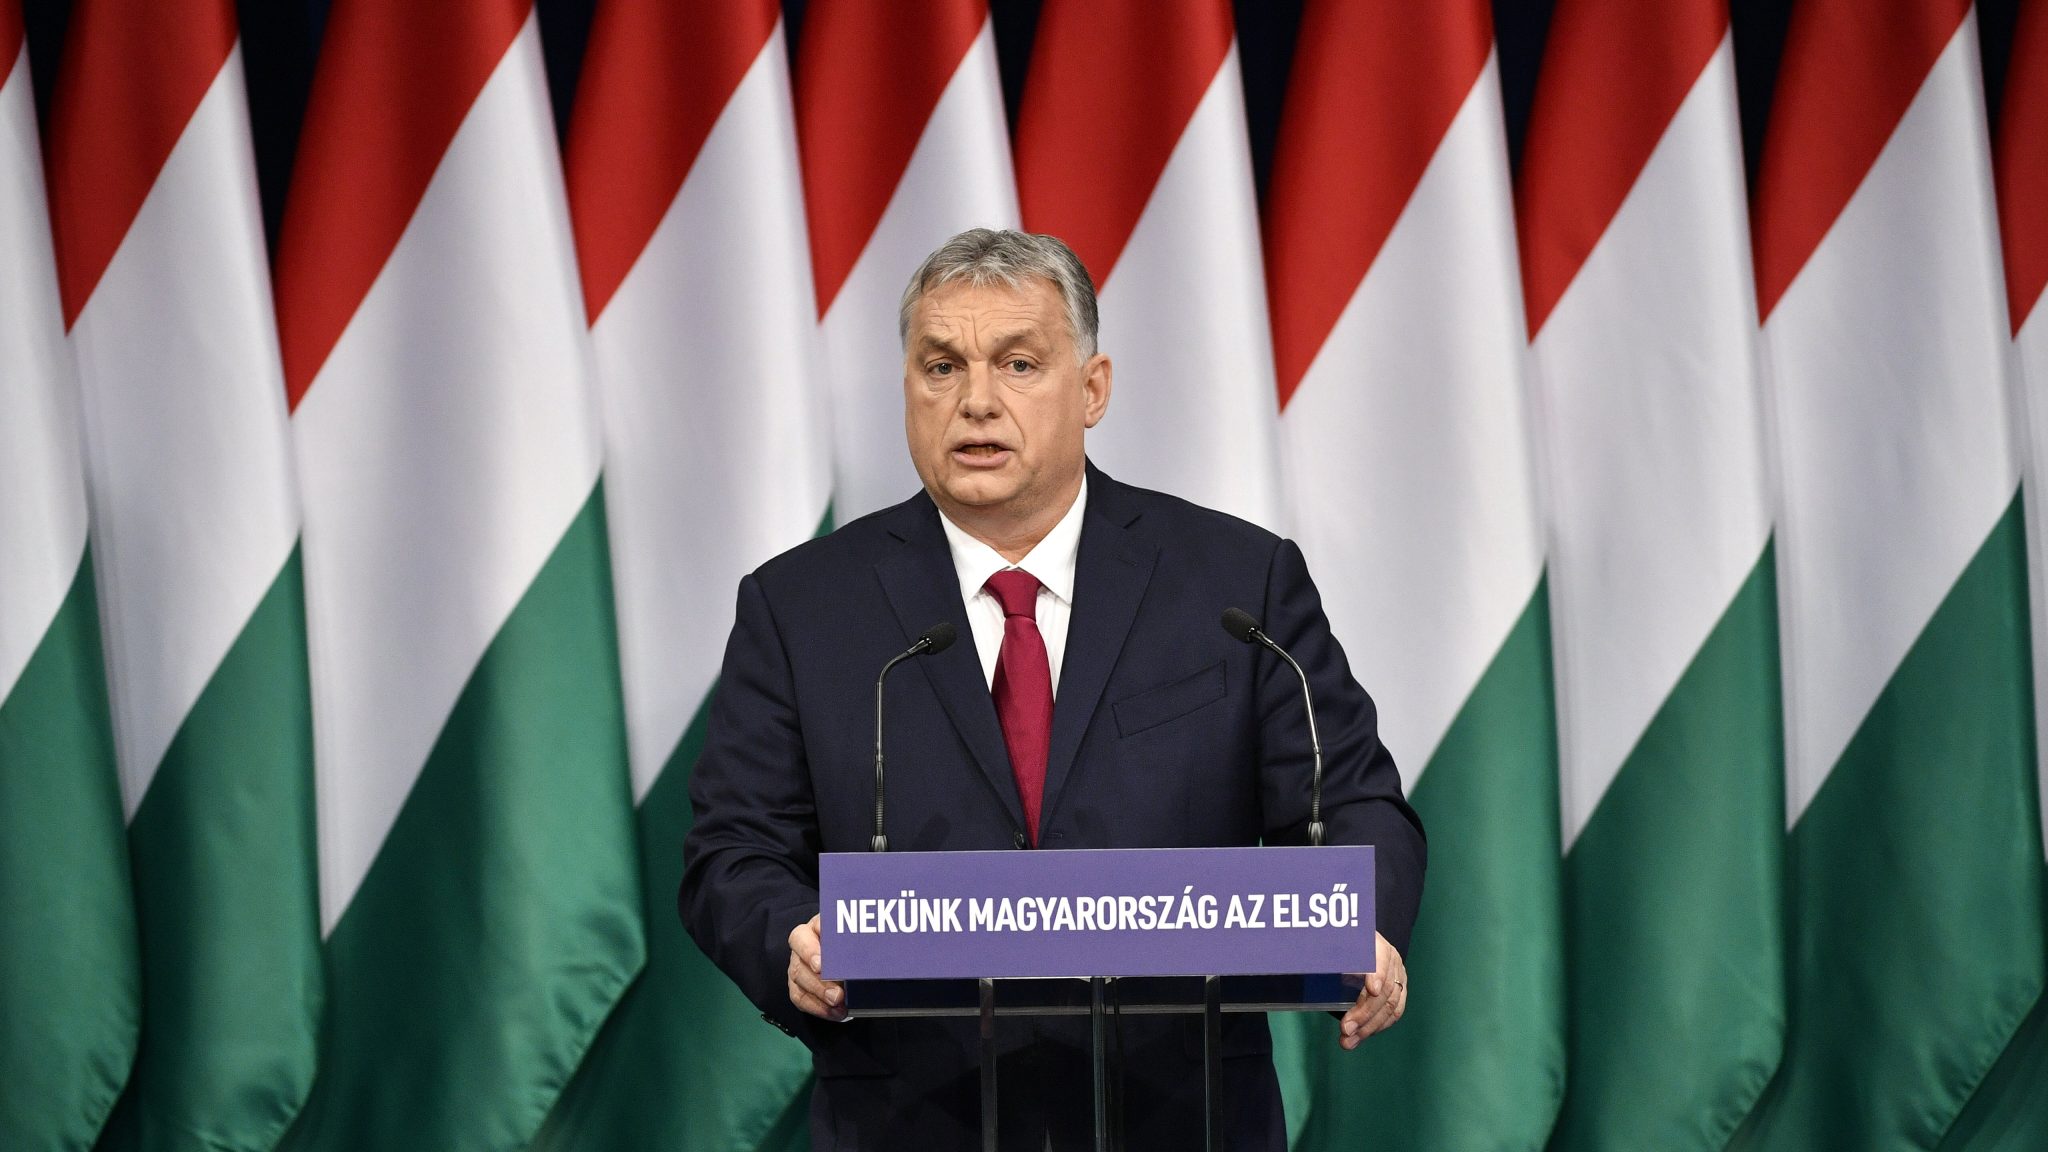 PM Orbán: 'The war for Europe's spirit and future is being waged here and now'